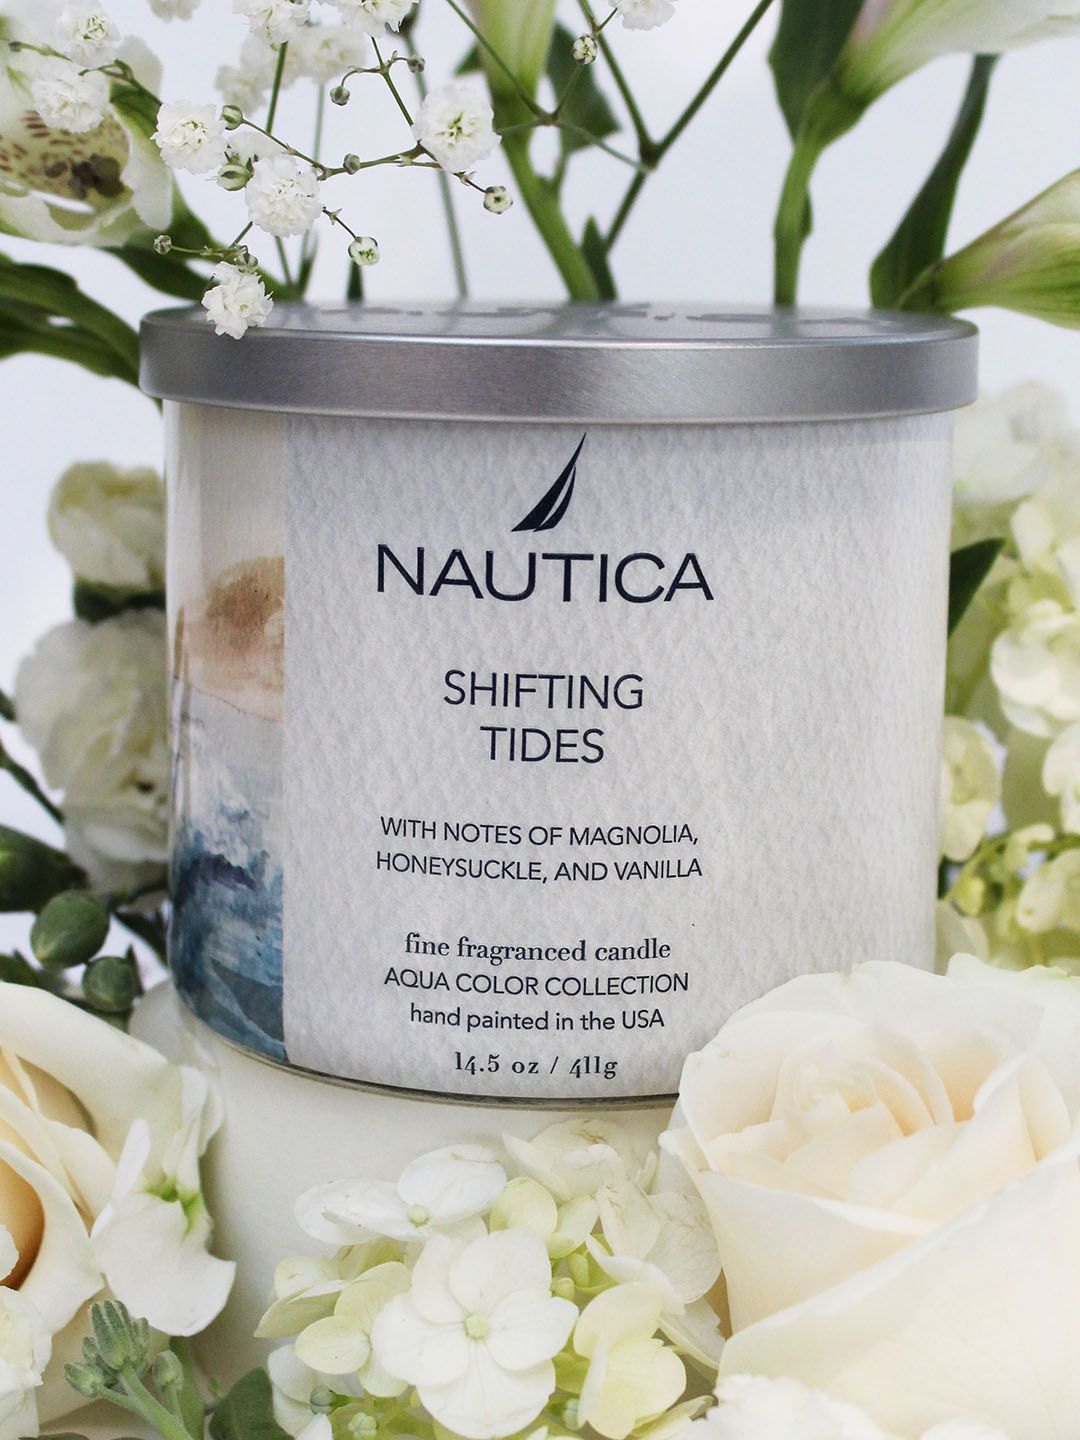 Nautica White Nautica Shifting Tides Fragranced Candle 411g Price in India